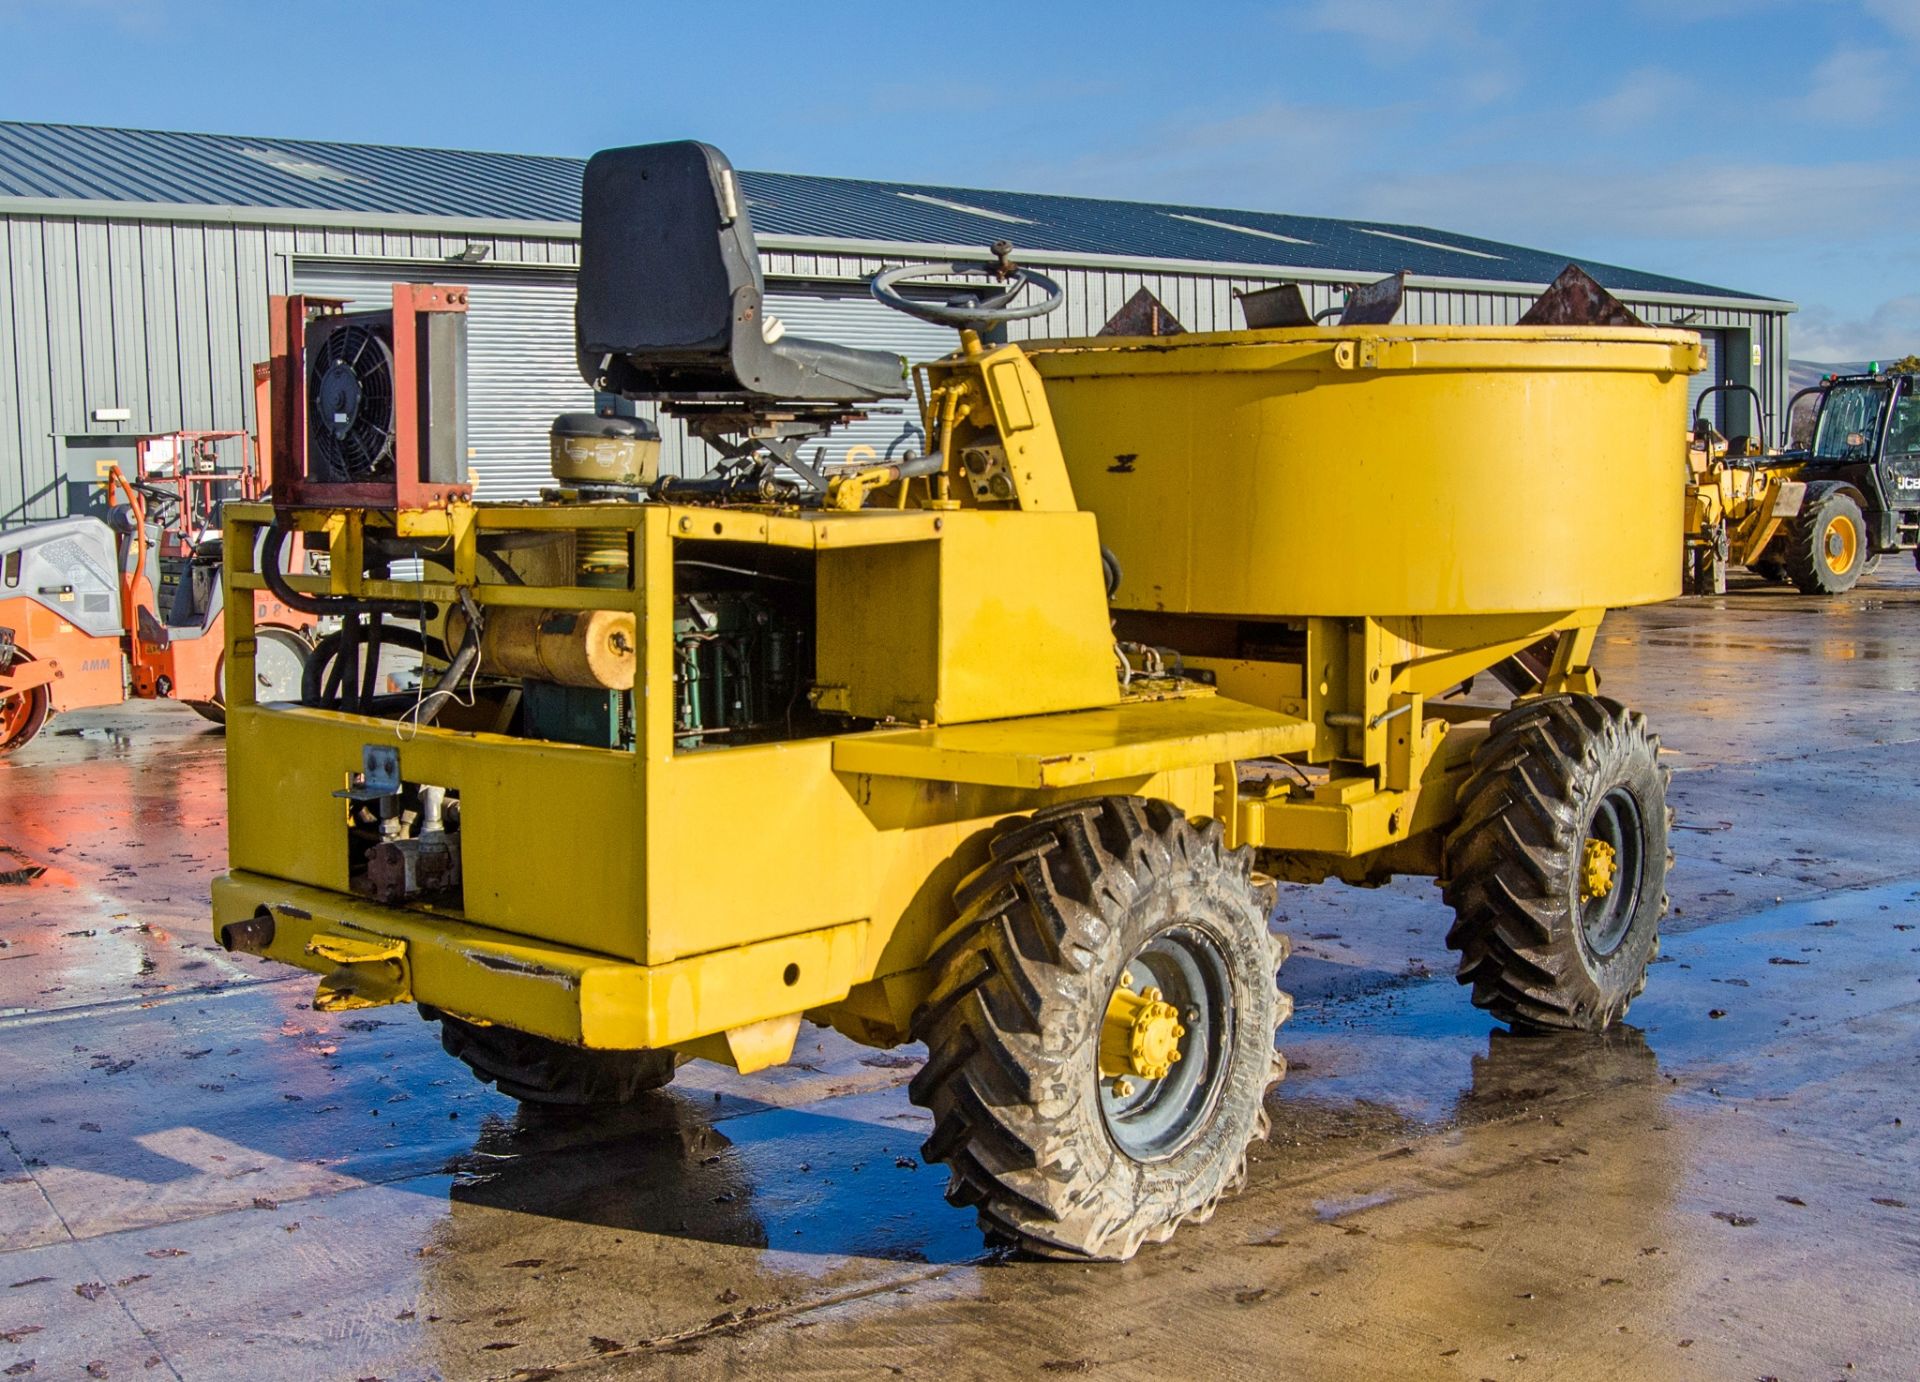 Mobile hydraulic pan mixer converted from a 3 tonne dumper - Image 4 of 19